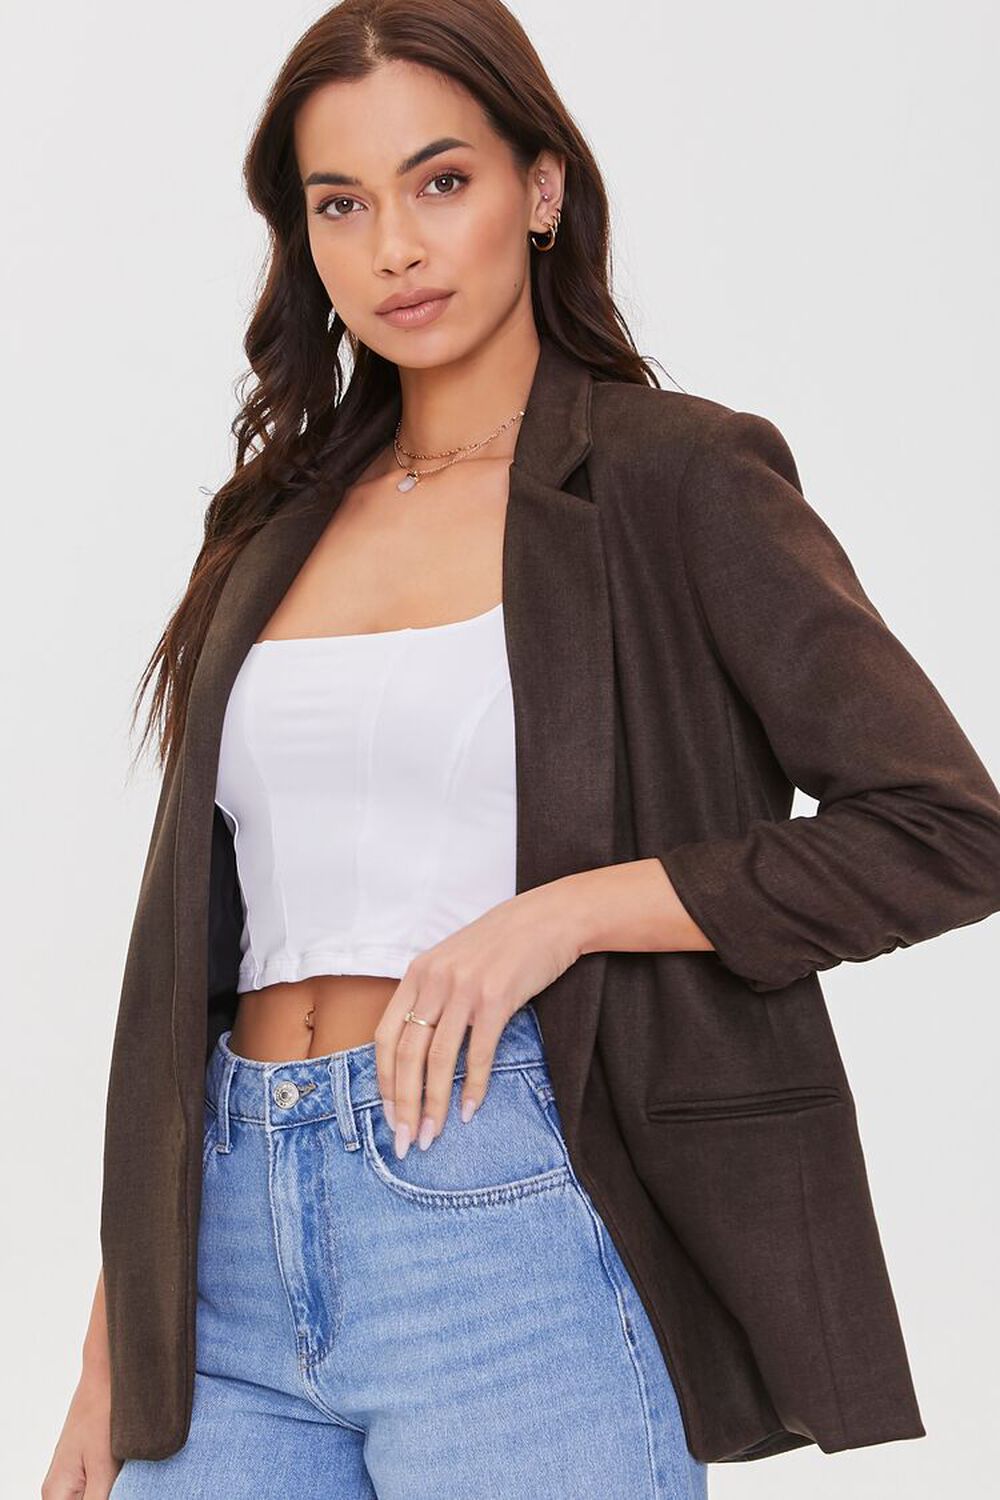 CHARCOAL Notched Open-Front Blazer, image 1